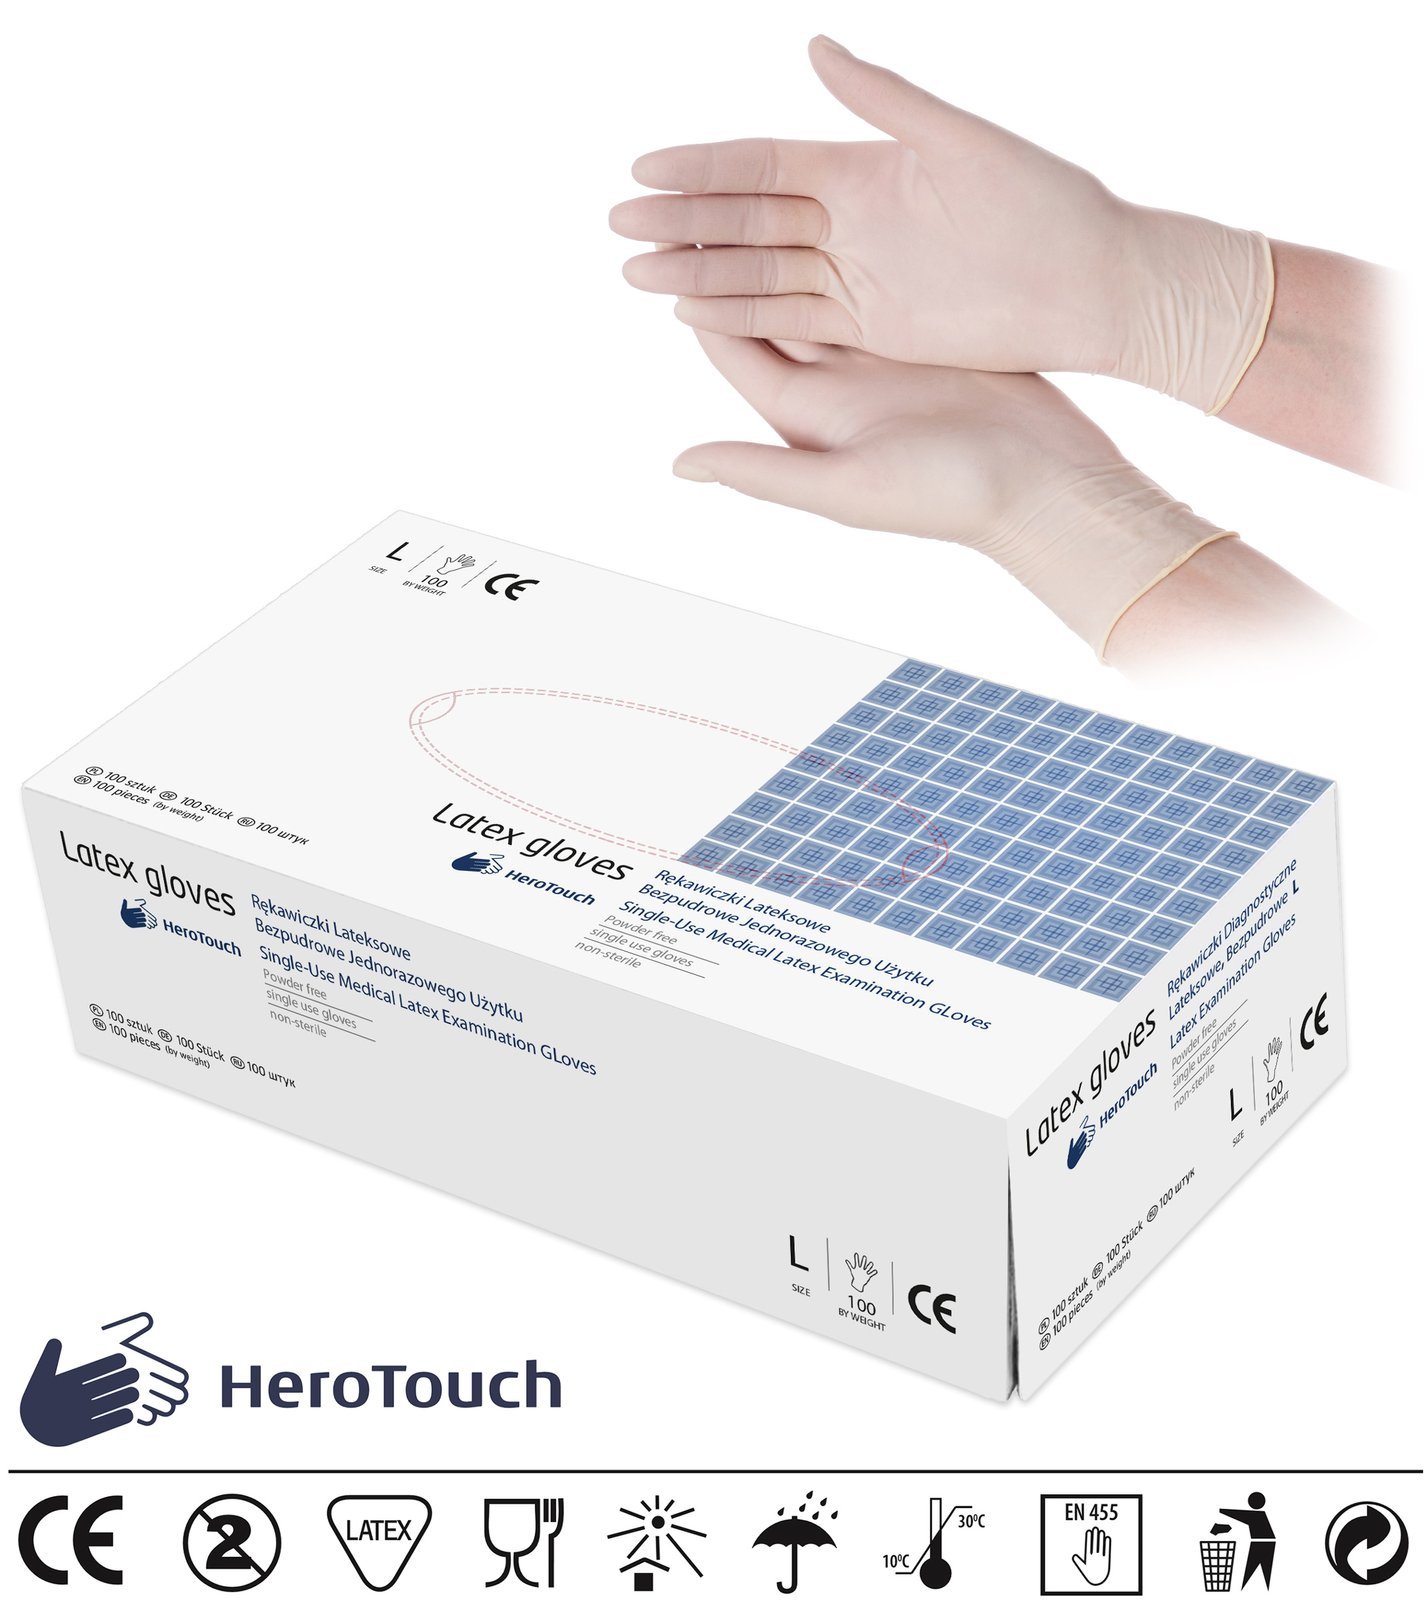 HeroTouch Medical Powderfree Latex Gloves